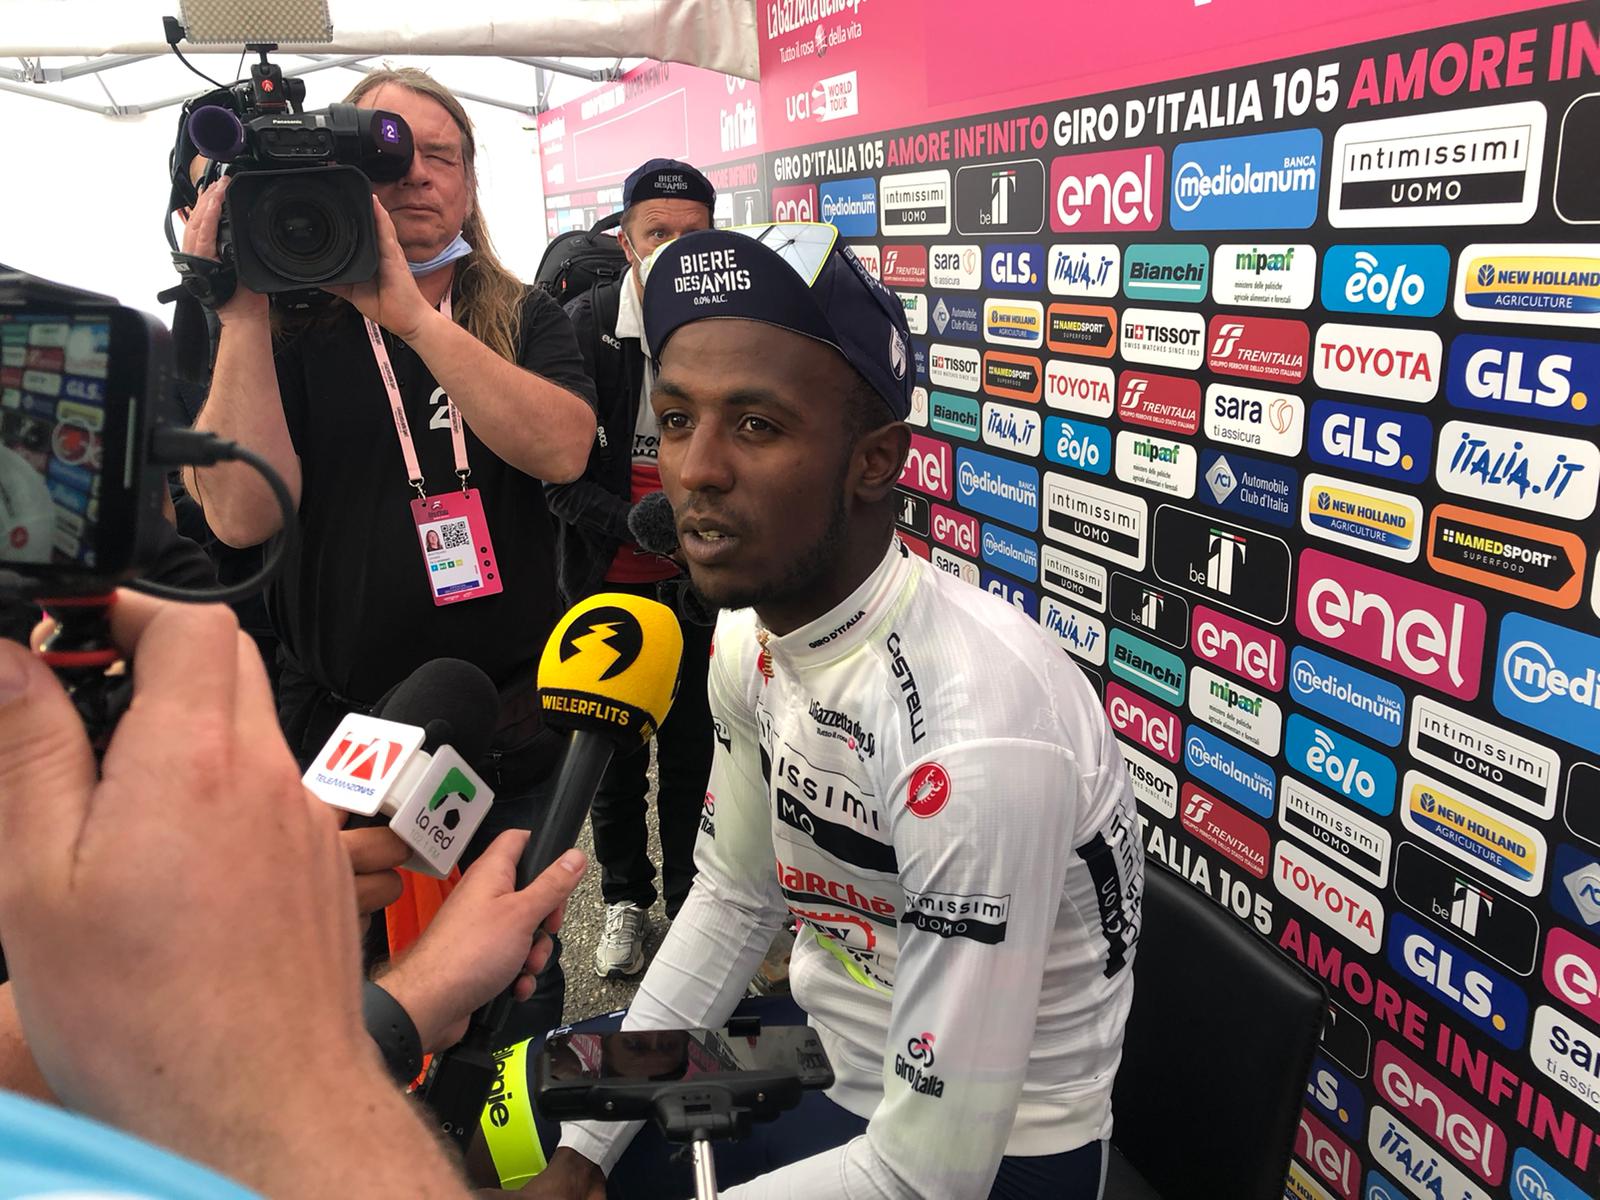 Biniam Girmay was beaten by Mathieu van der Poel but took the best young rider's white jersey